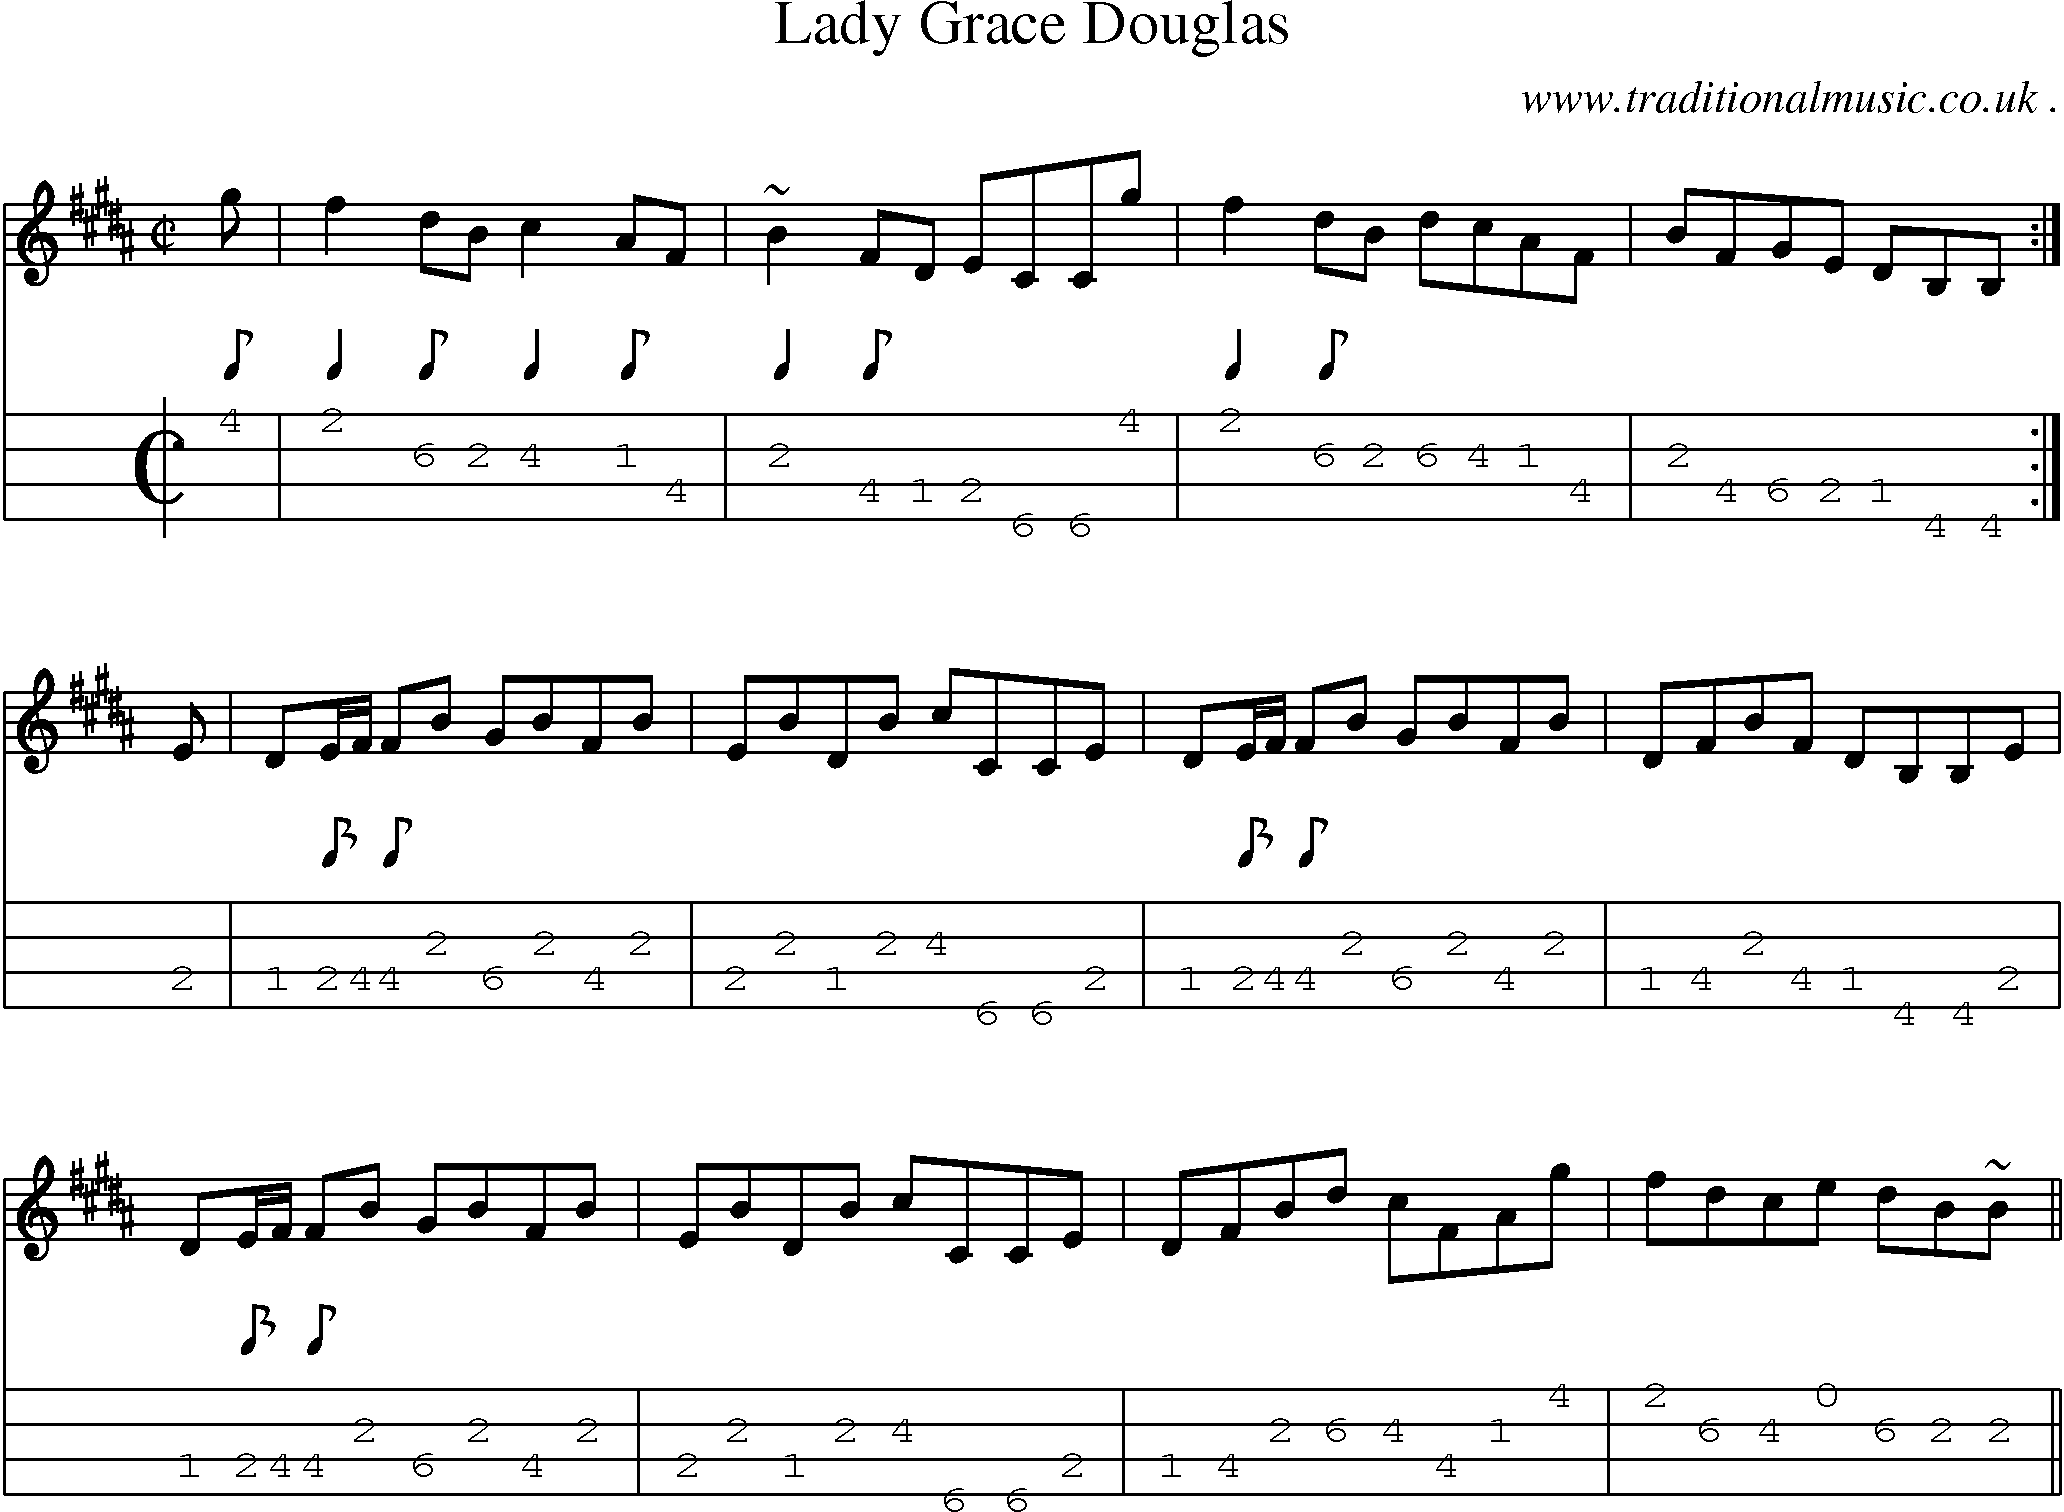 Sheet-music  score, Chords and Mandolin Tabs for Lady Grace Douglas